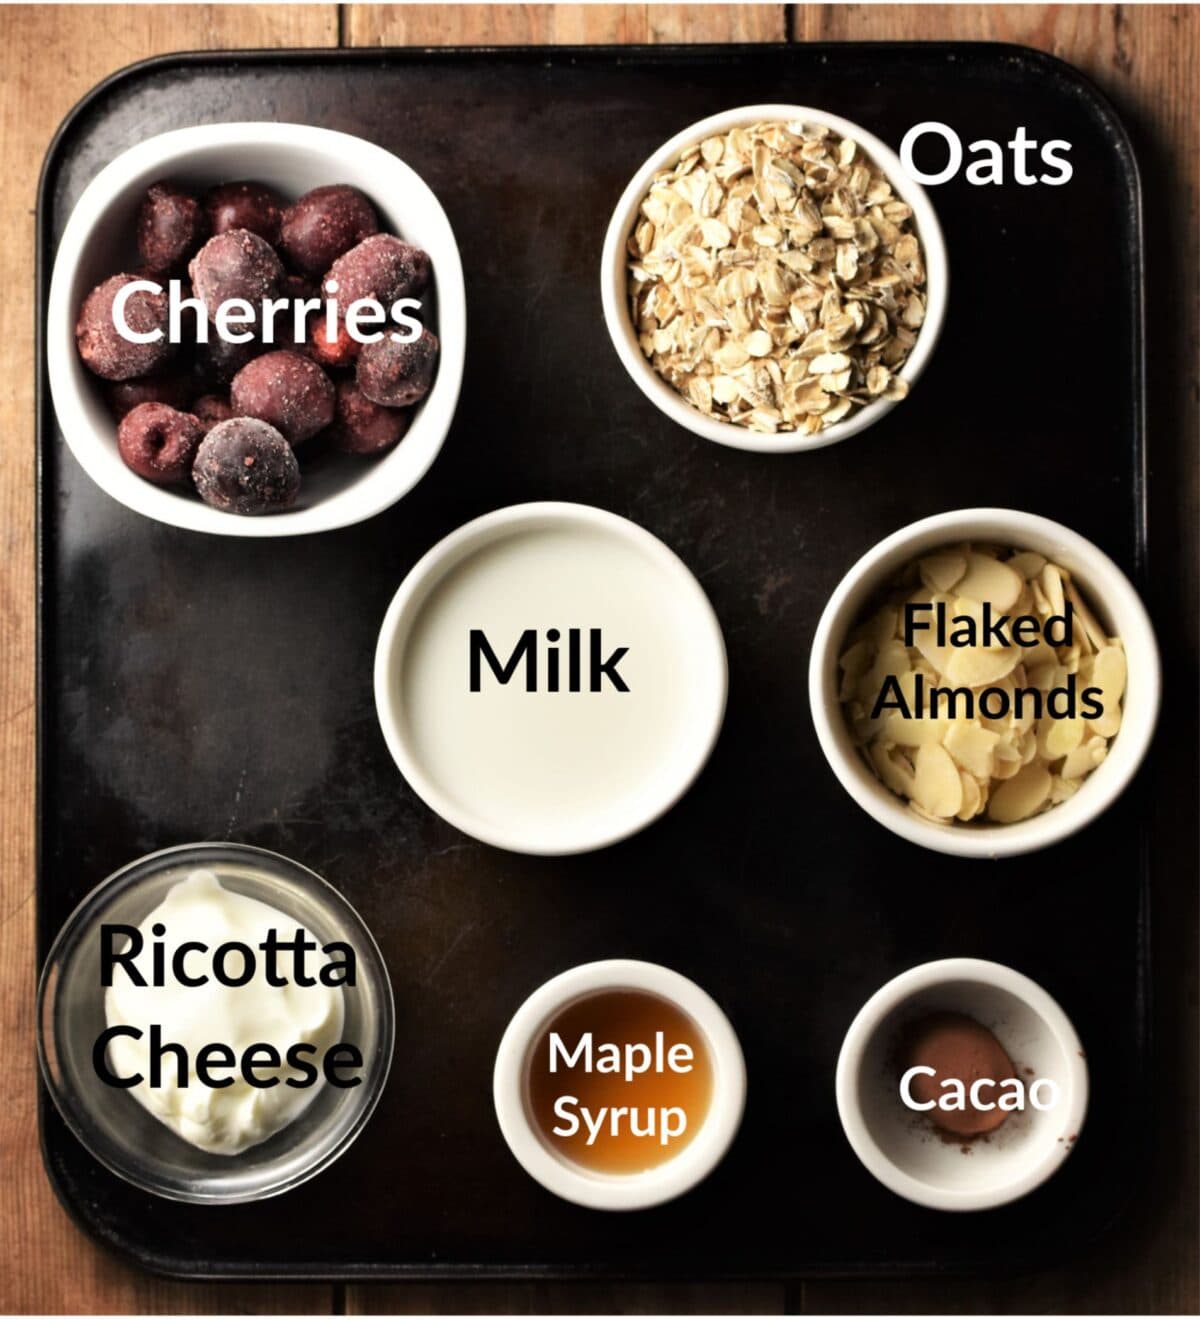 Cherry overnight oats ingredients in individual dishes.